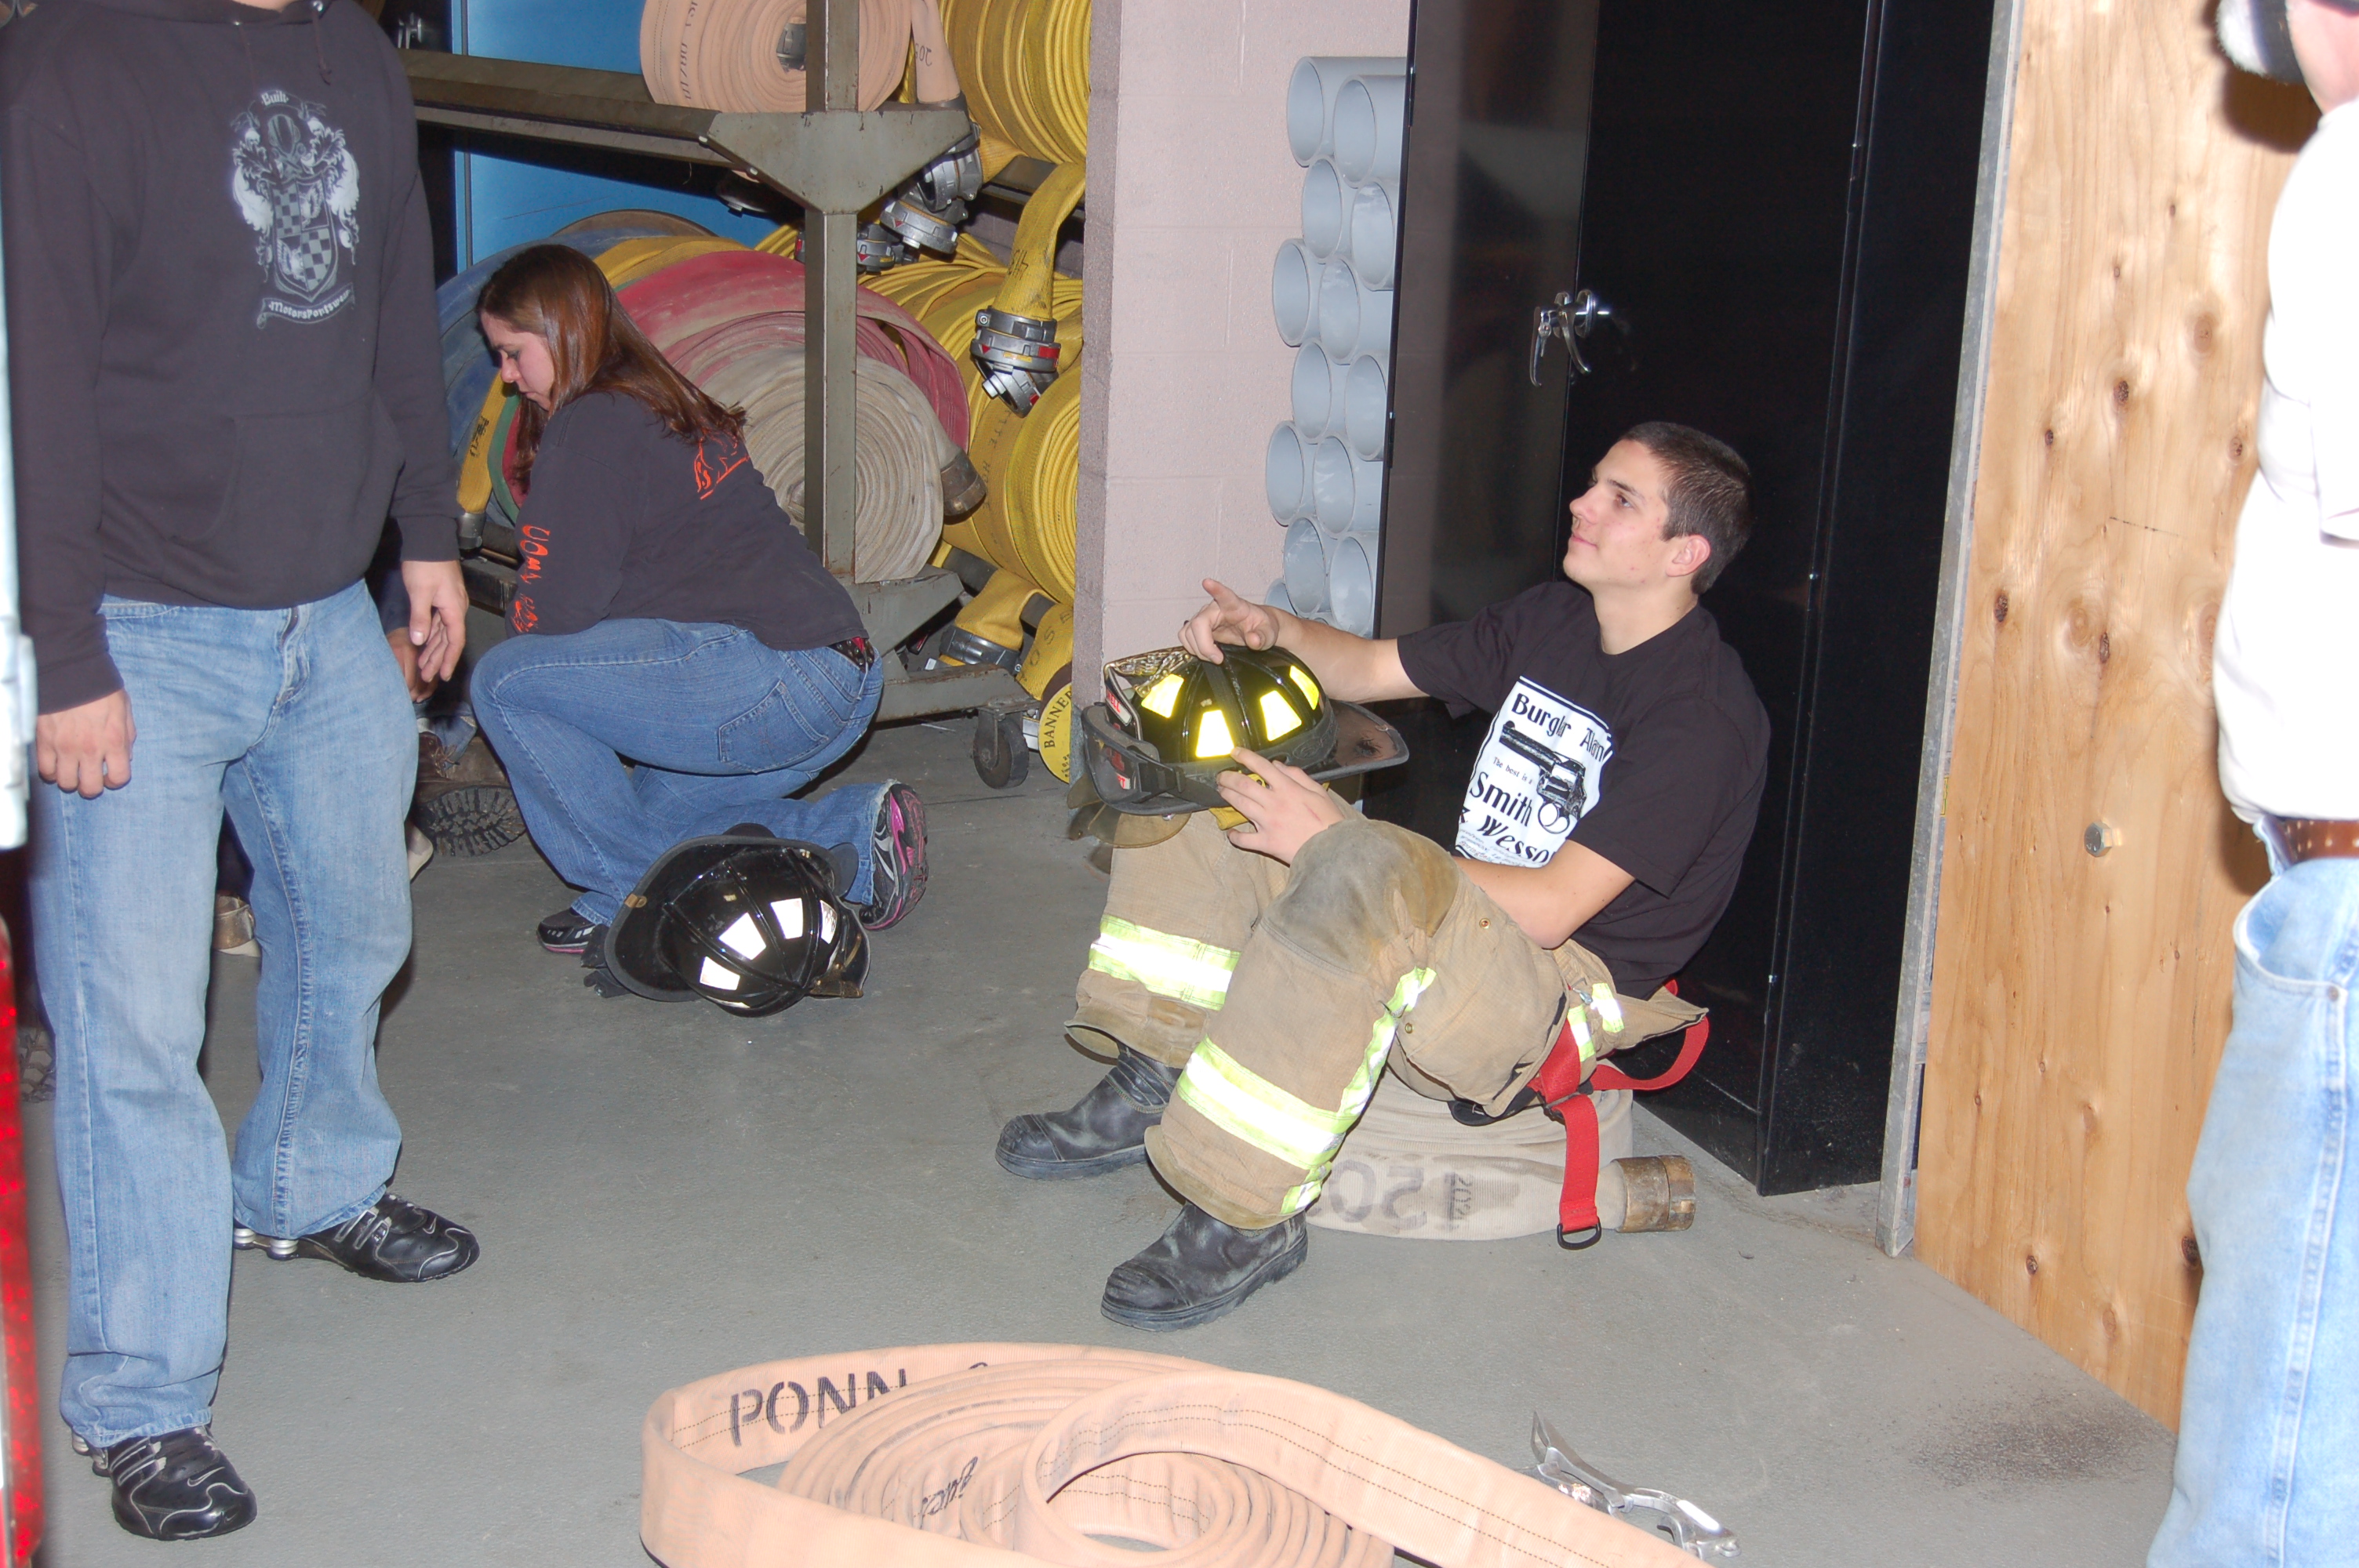 12-19-11  Other - Fire Fighter 1 Class